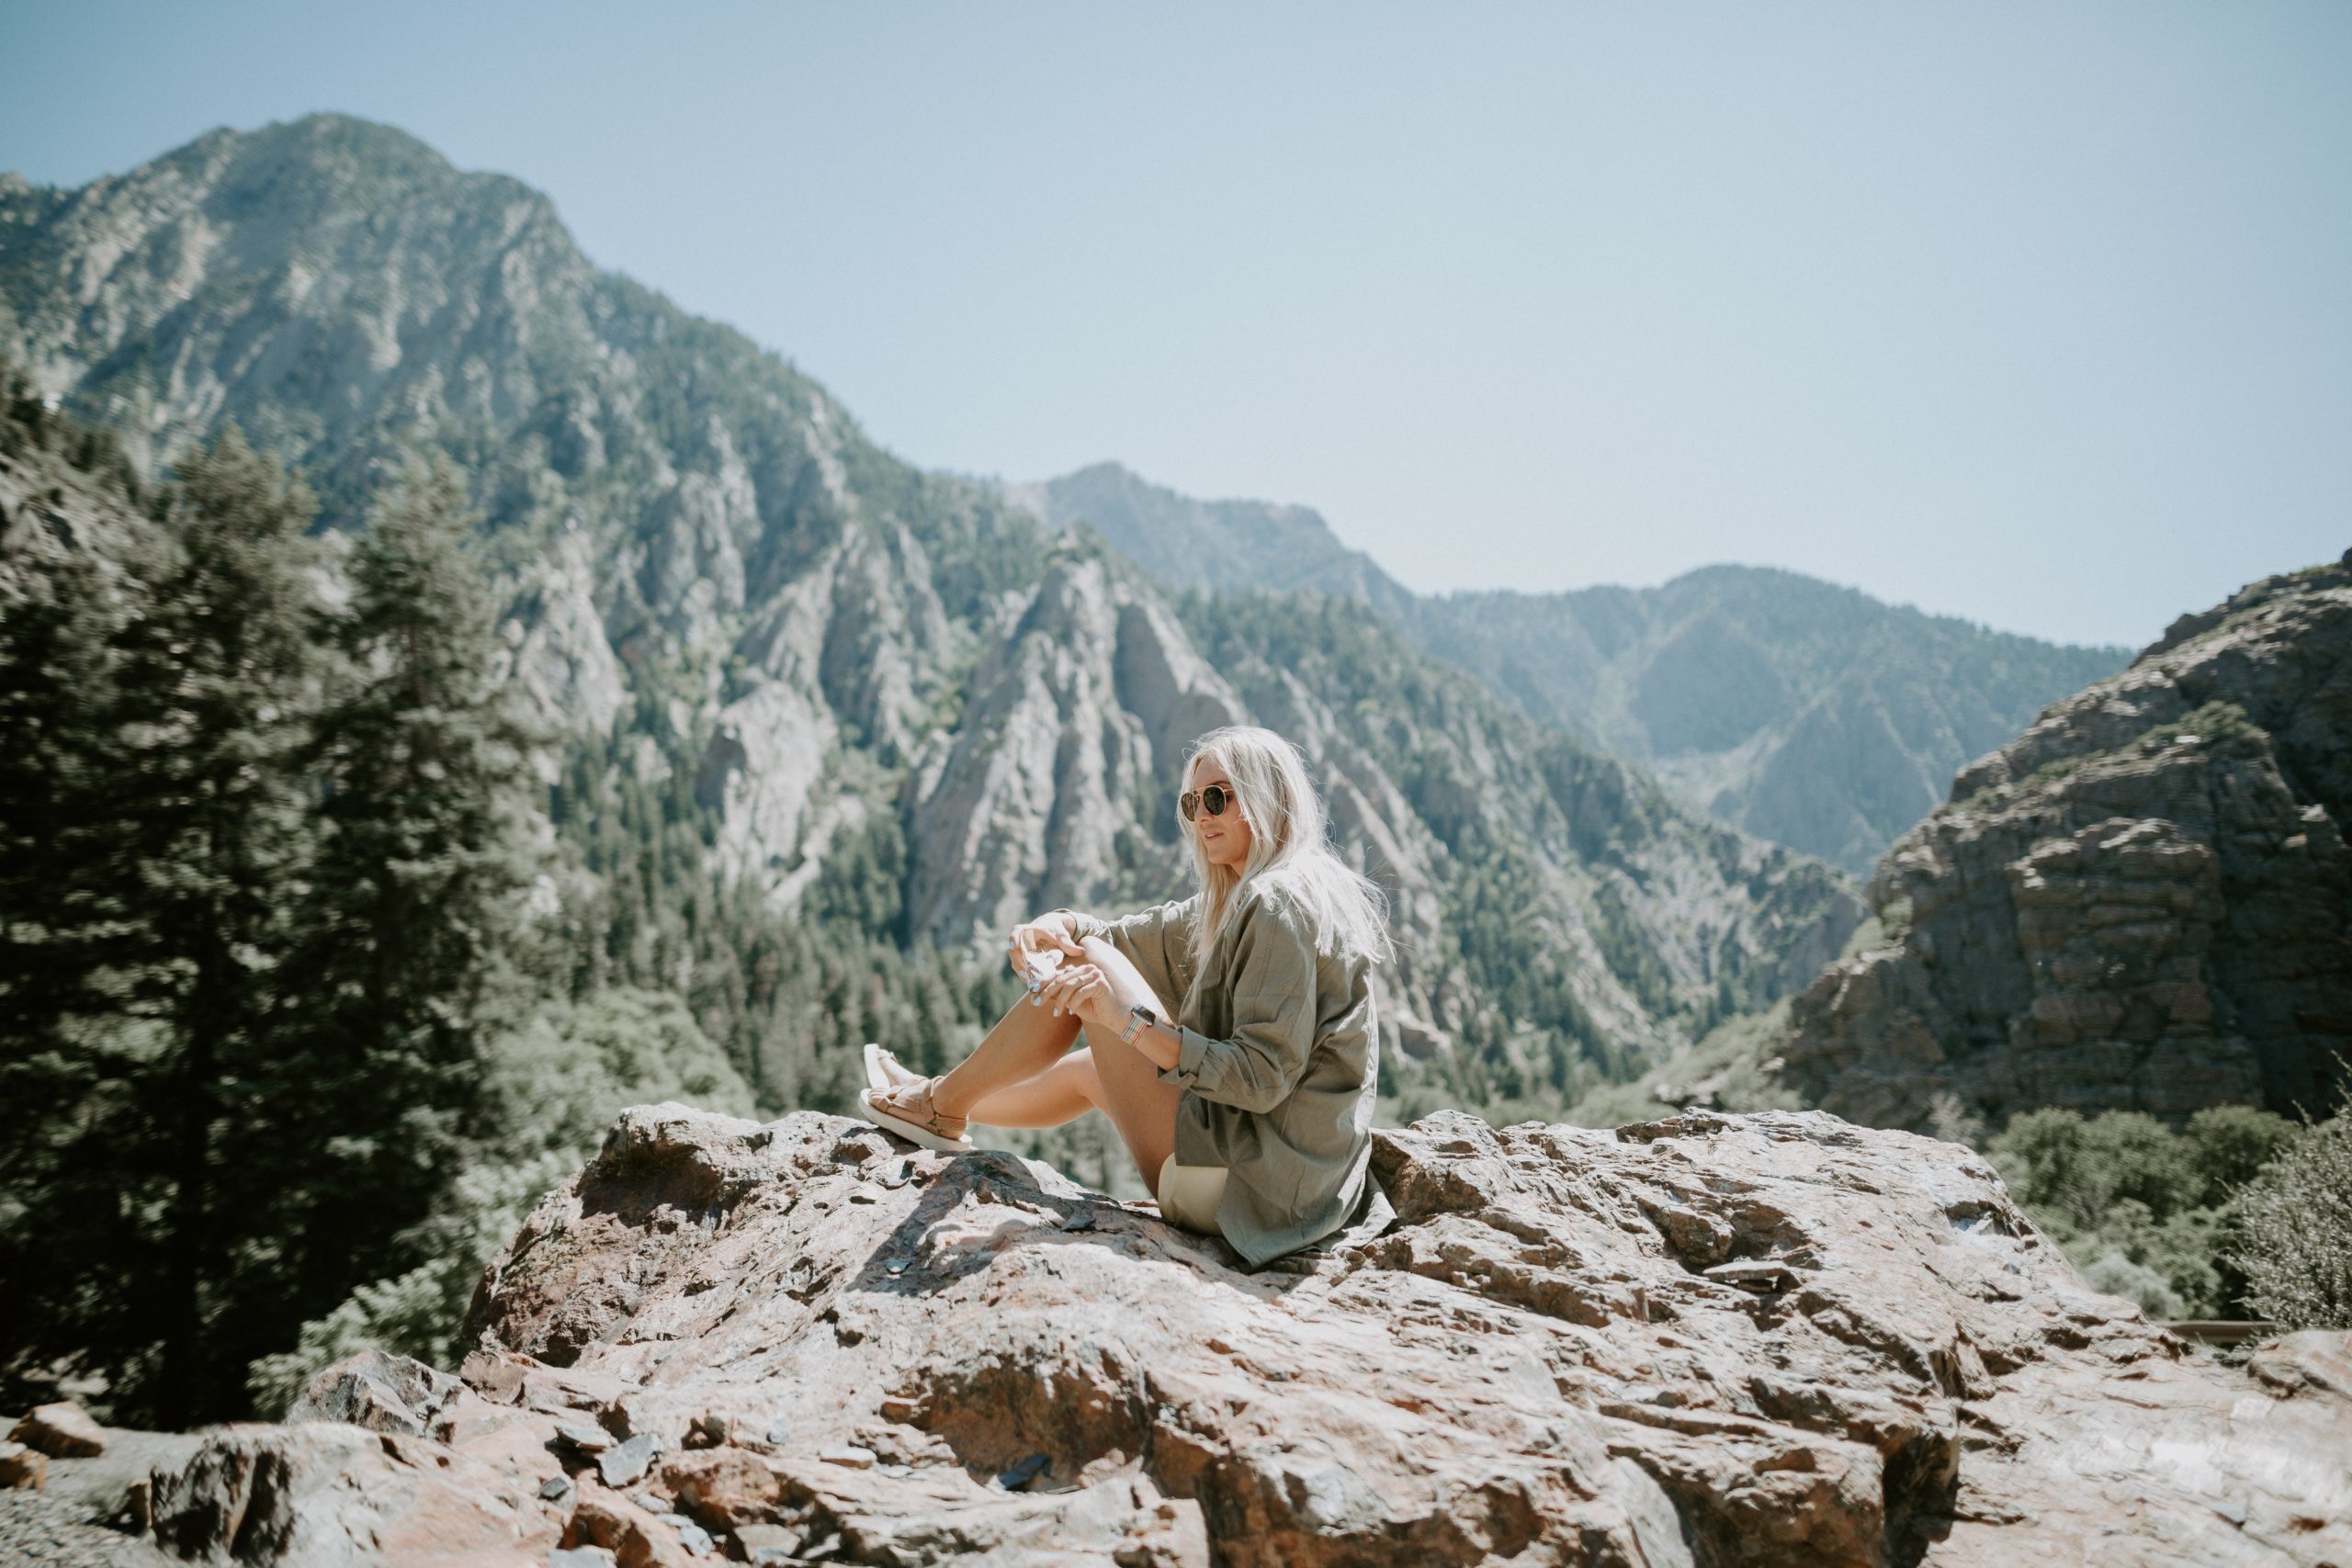 Girl traveling to mountains sitting on the edge of a cliff looking at trees on mountains